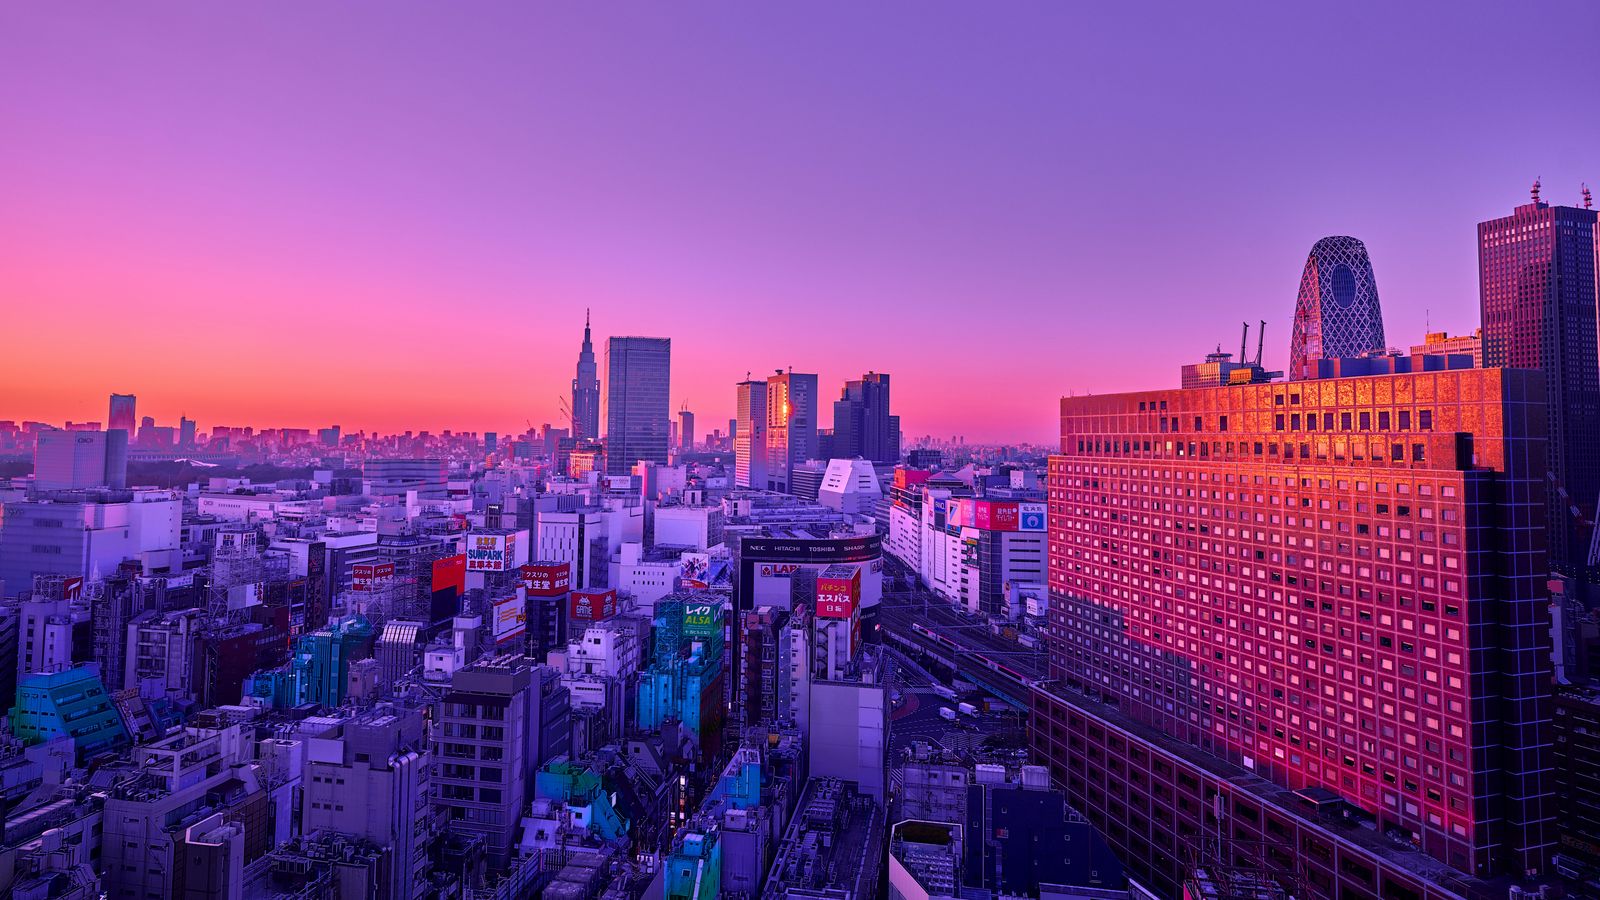 Download wallpaper 1600x900 city, aerial view, buildings, dusk, purple widescreen 16:9 HD background